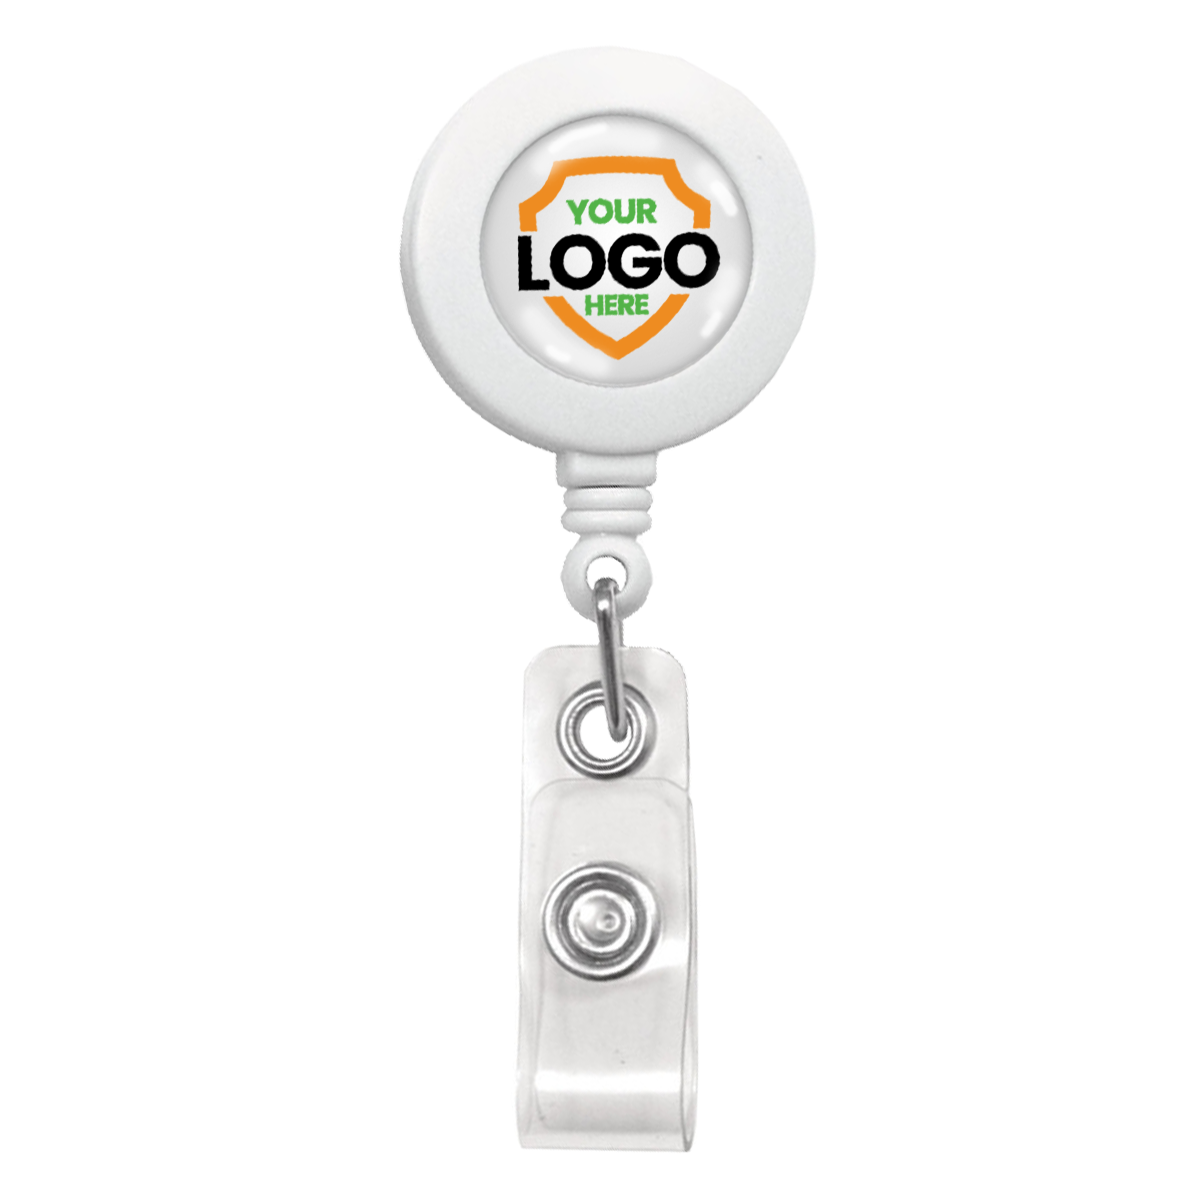 A Custom Printed Retractable Badge Reels With Belt Clip - Personalize with Your Brand Logo, featuring a placeholder for a logo labeled "YOUR LOGO HERE" encased in a circular cover, is perfect to promote brand awareness with full color graphics.